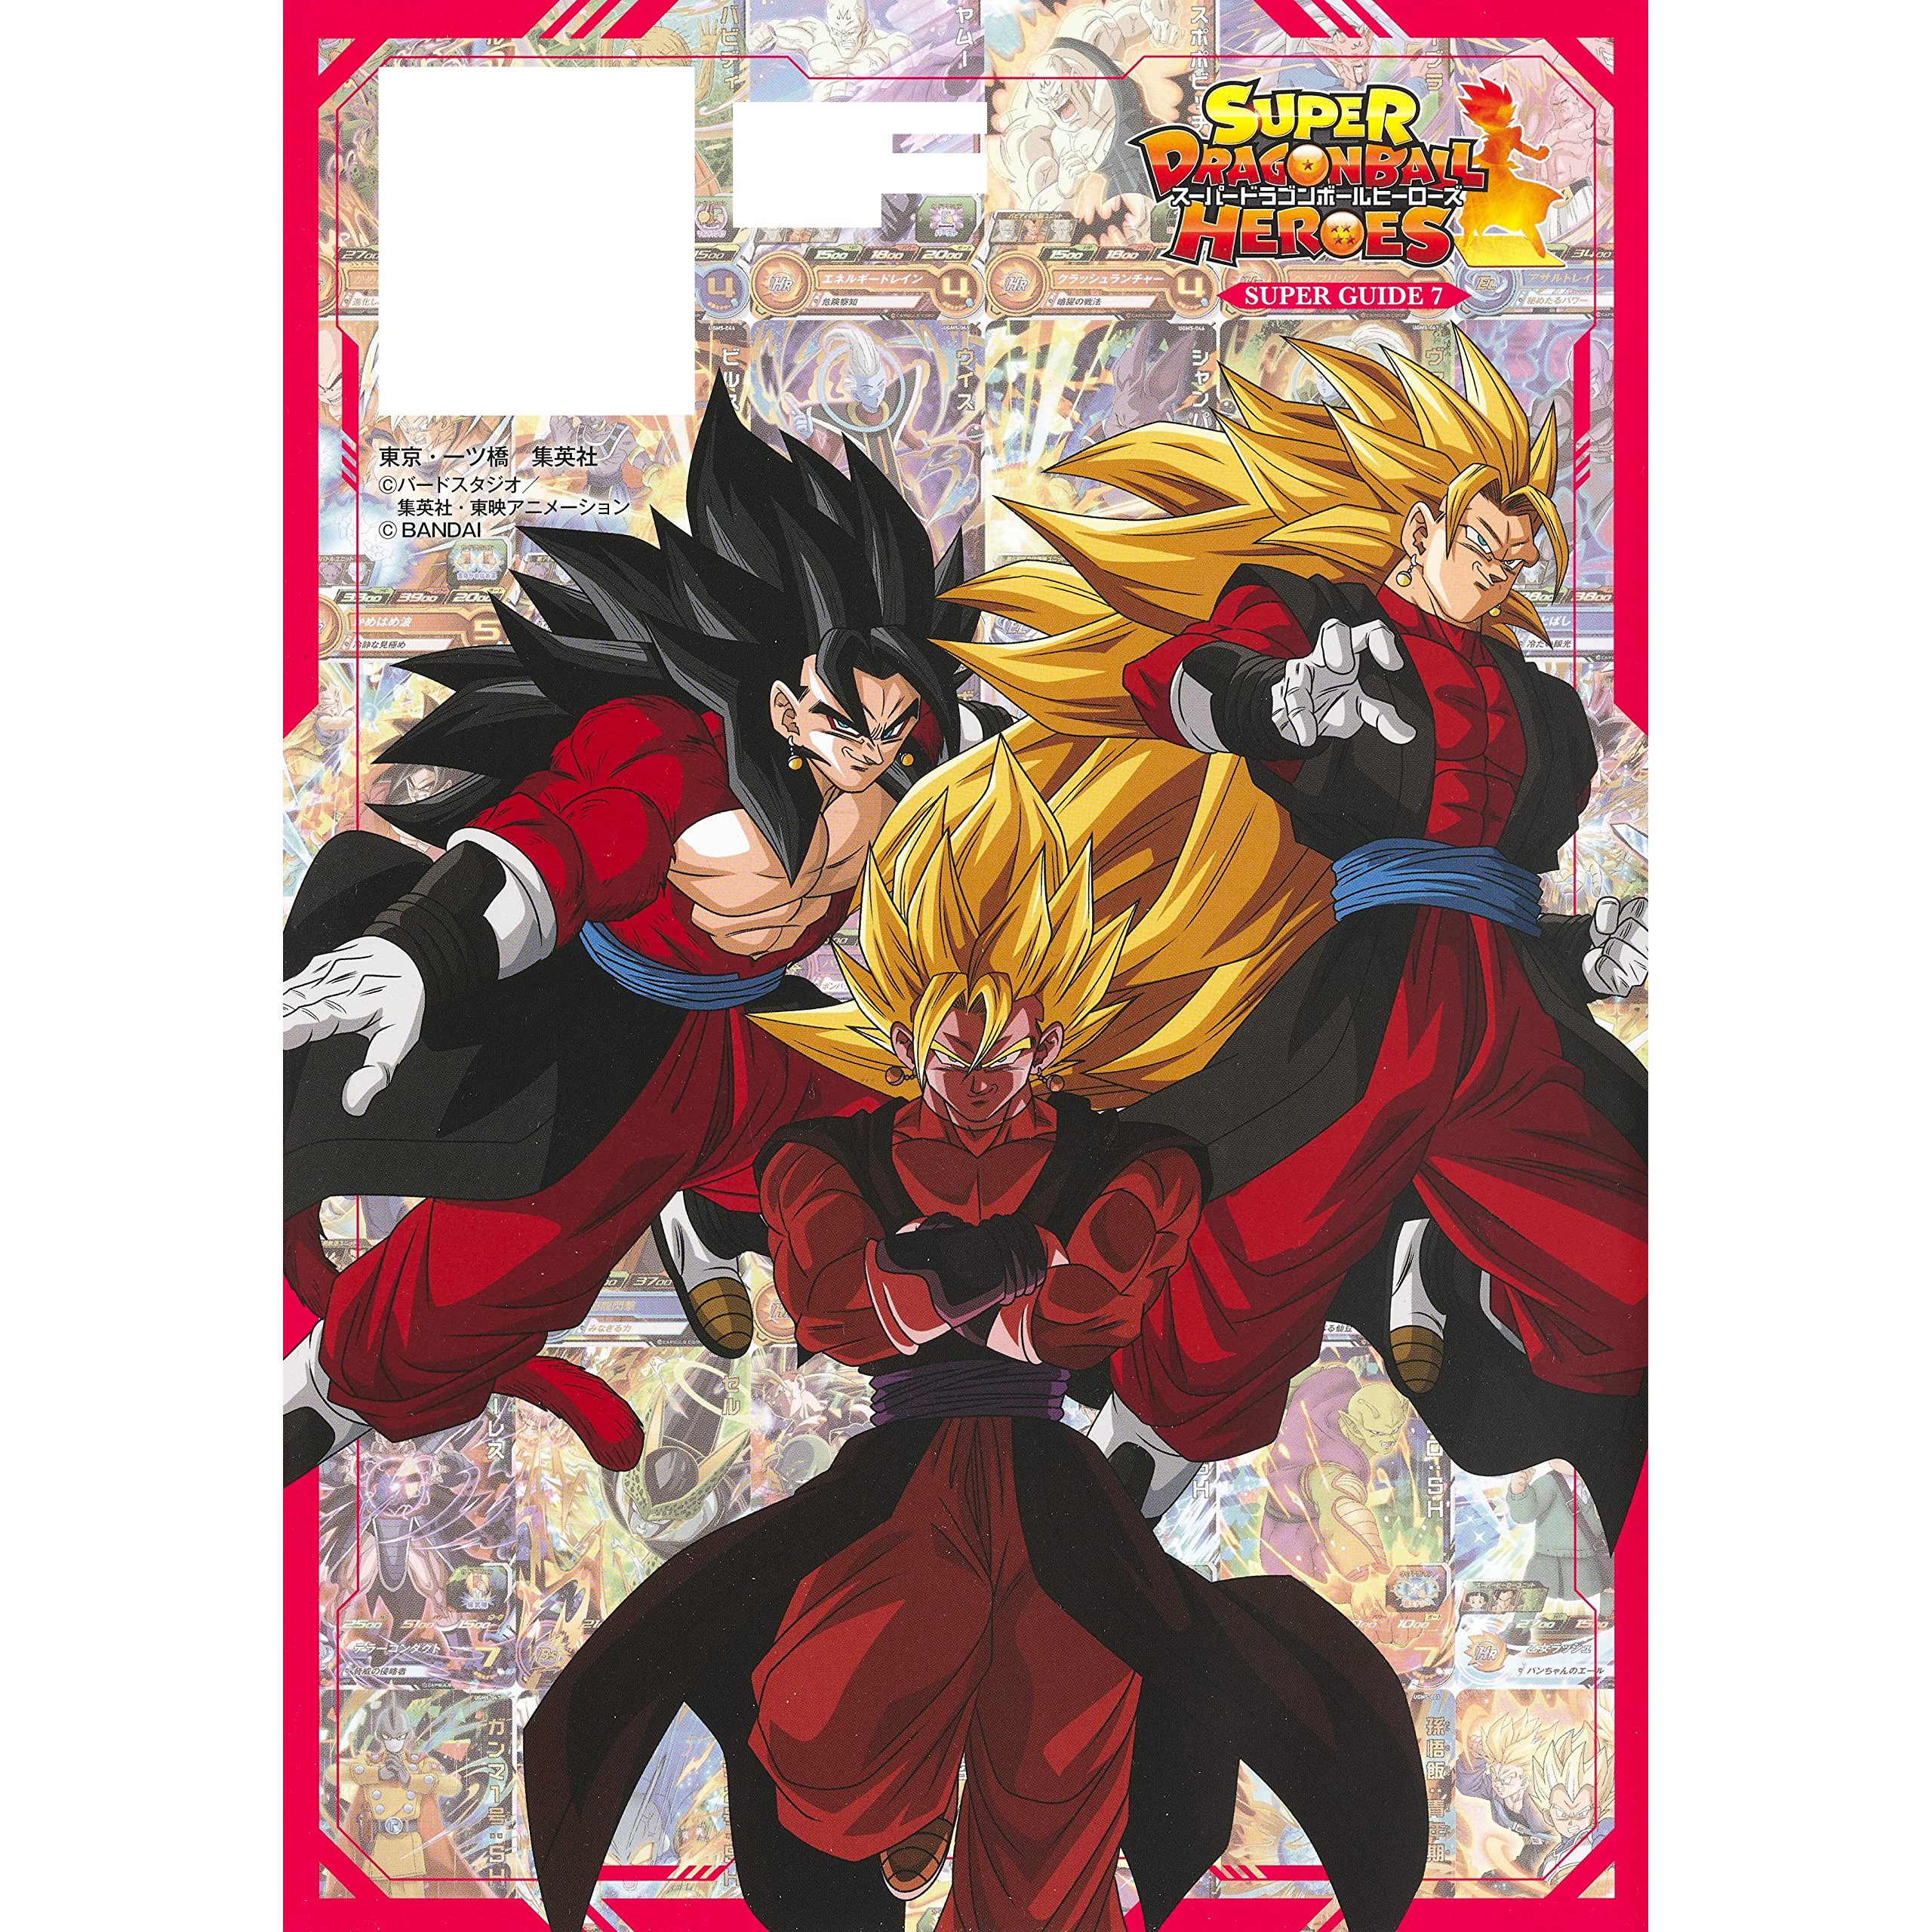 Super Dragon Ball Heroes 12th Guide Book (with promo cards)